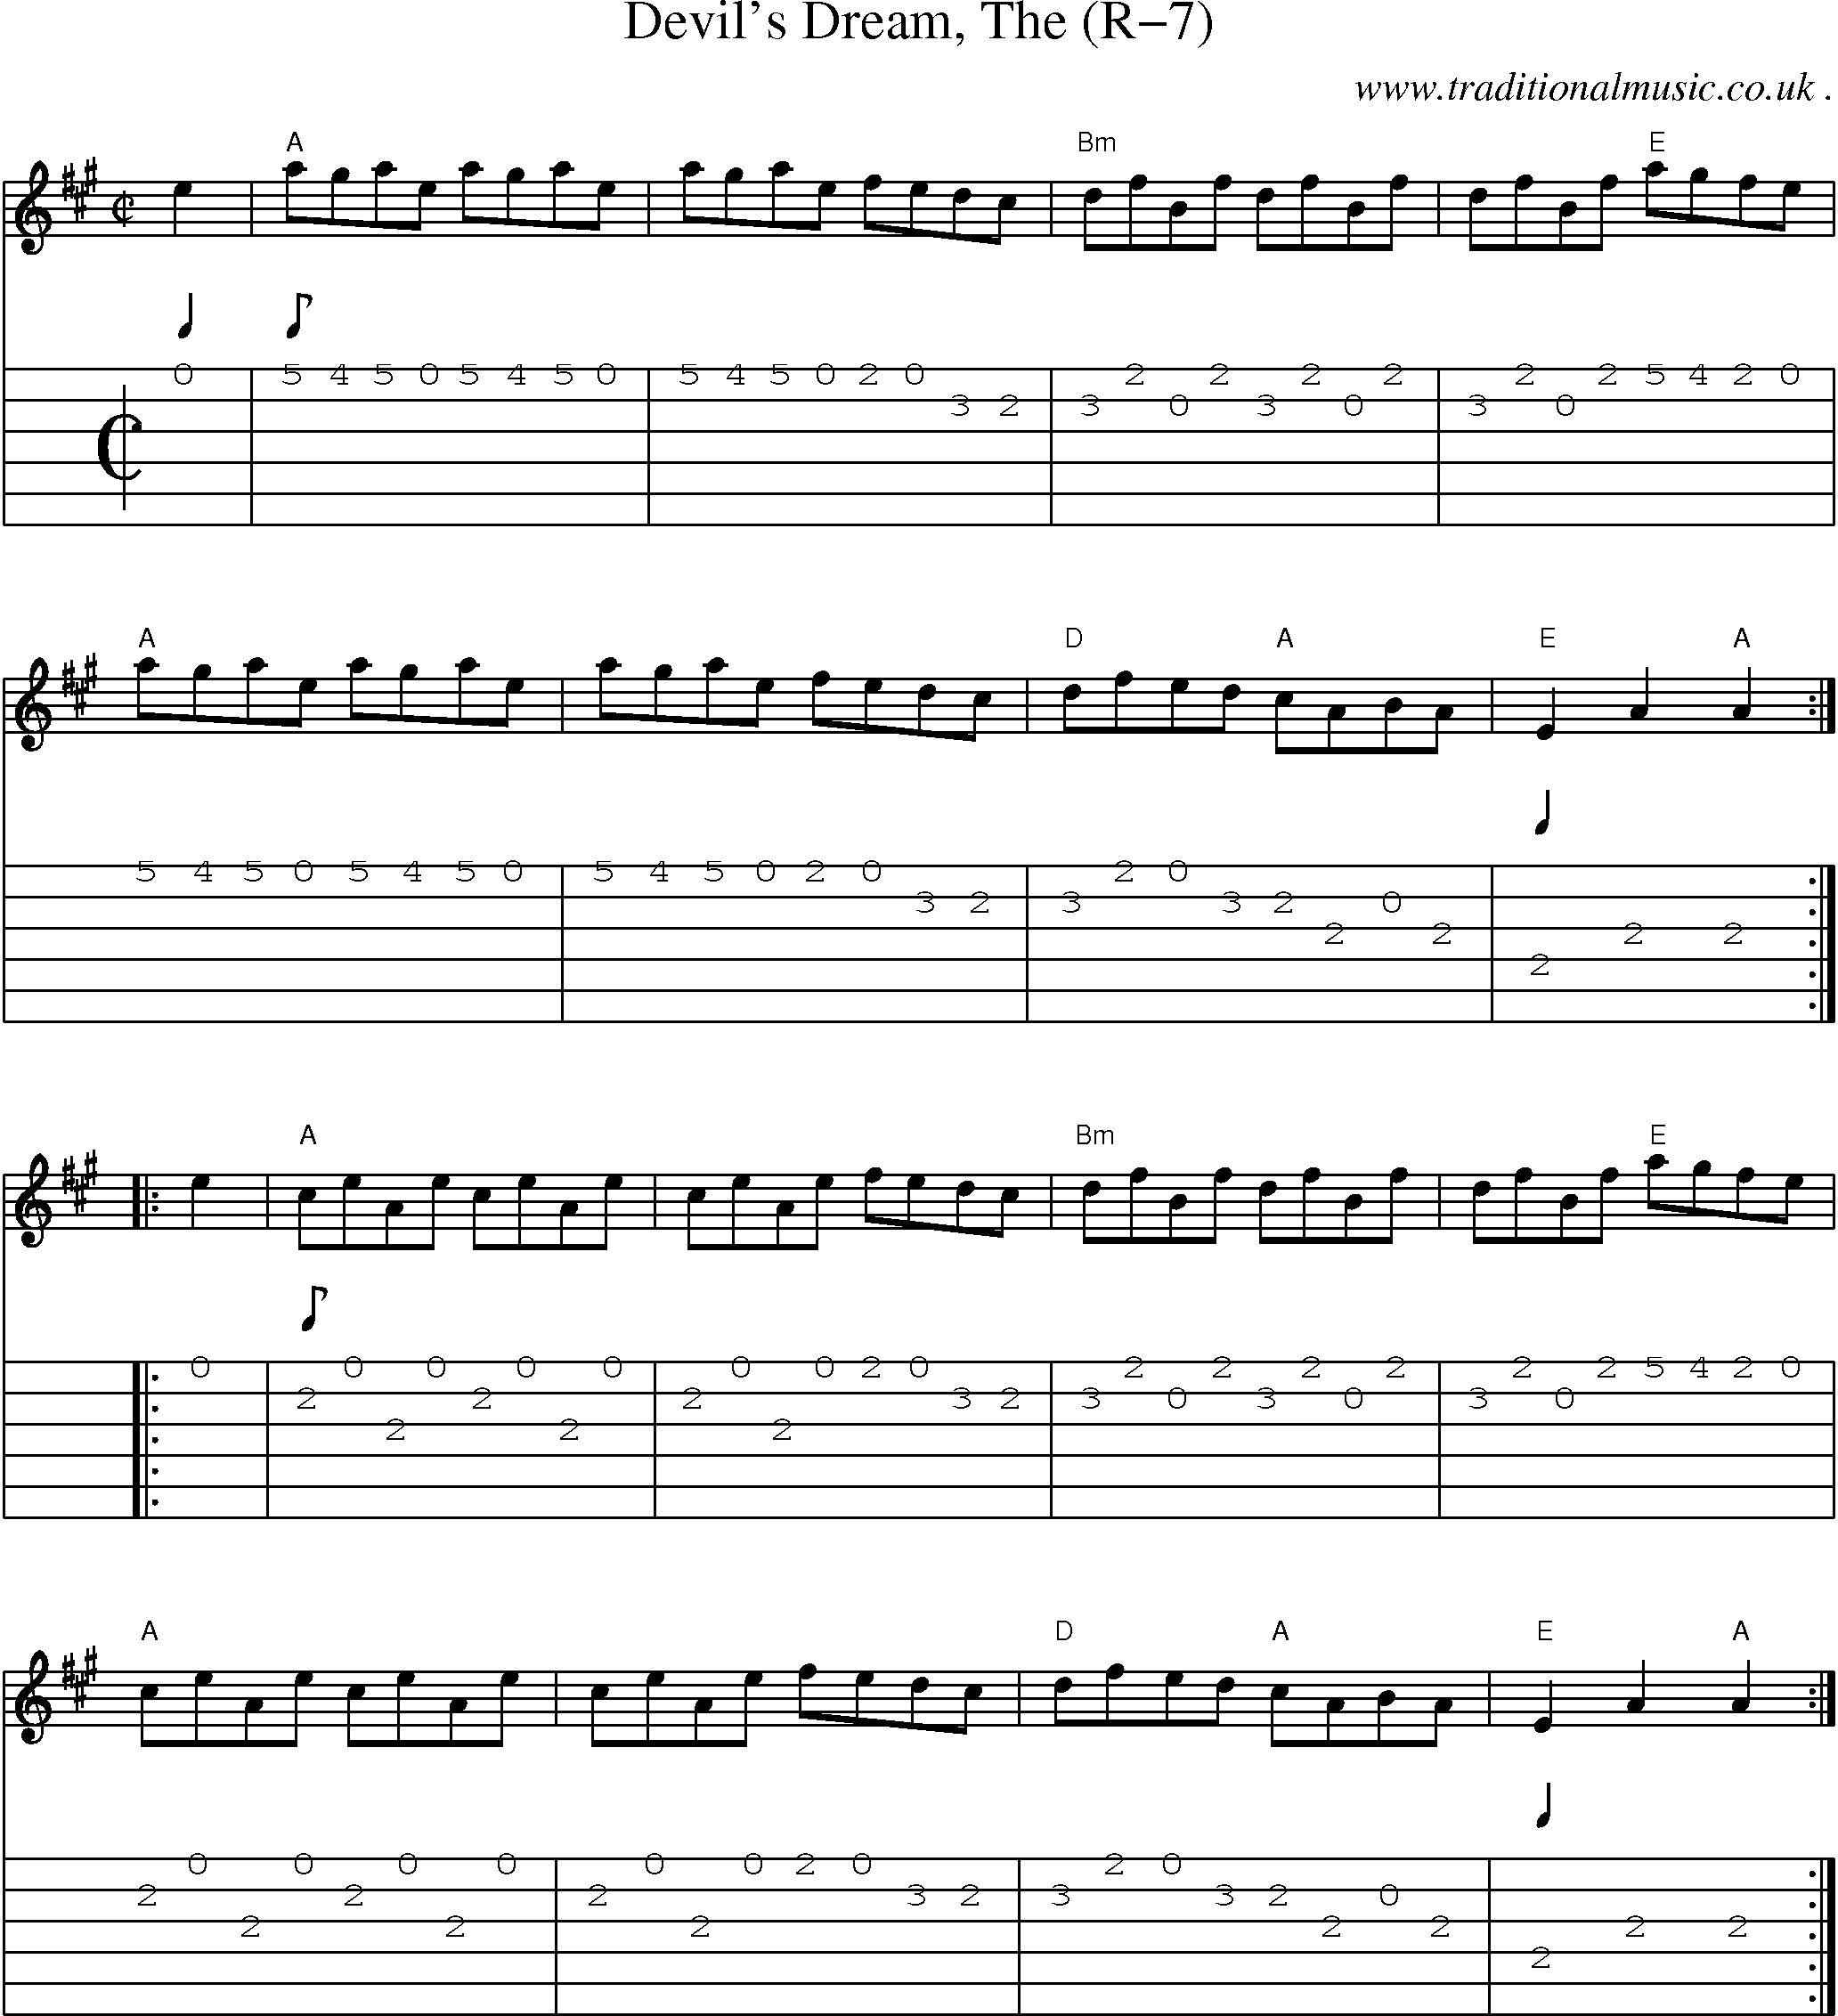 Music Score and Guitar Tabs for Devils Dream The